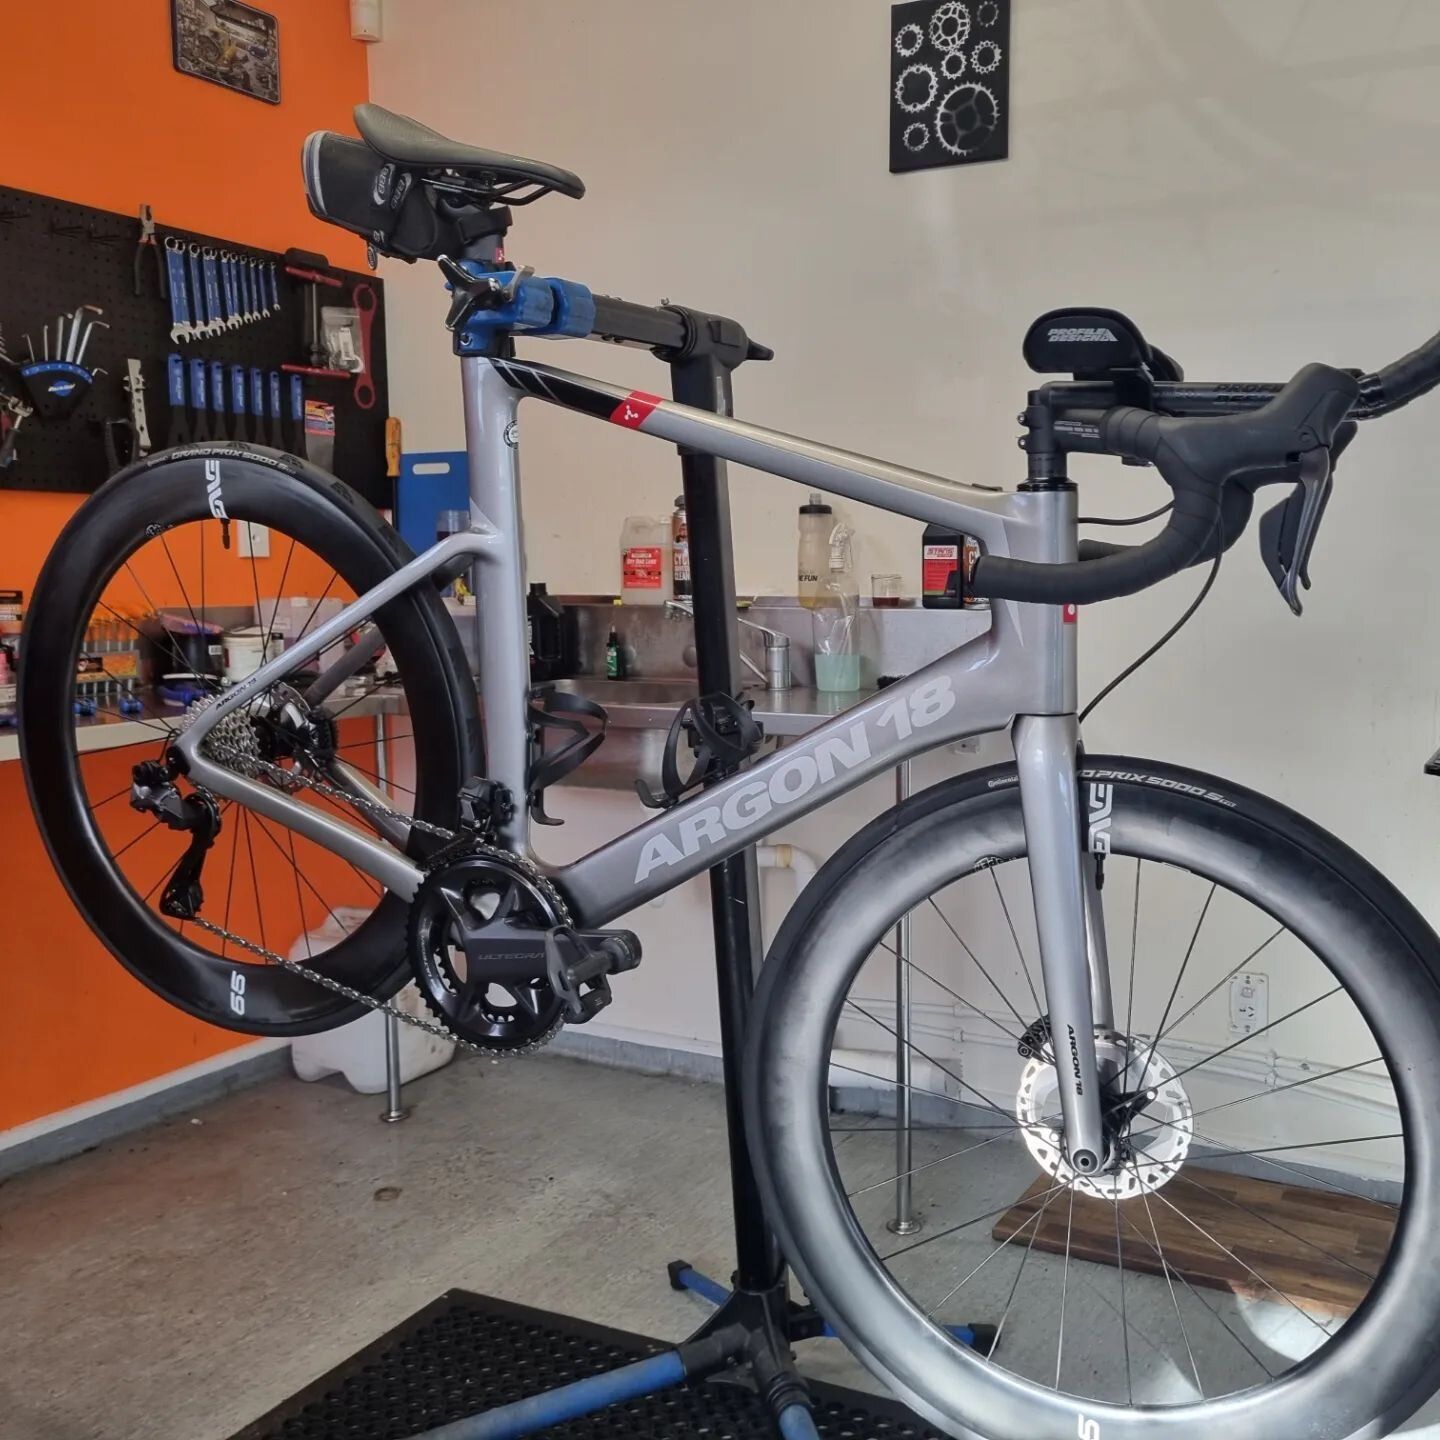 A couple of stunning bikes in for an annual 
Service. On a Trek supercaliber &amp; an Argon 18.
Both bikes were checked and inspected✅️
Full drive chain cleaned degreased ✅️
BB cleaned and greased✅️
Hubs and headsets checked✅️
Brakes gears tuned and 